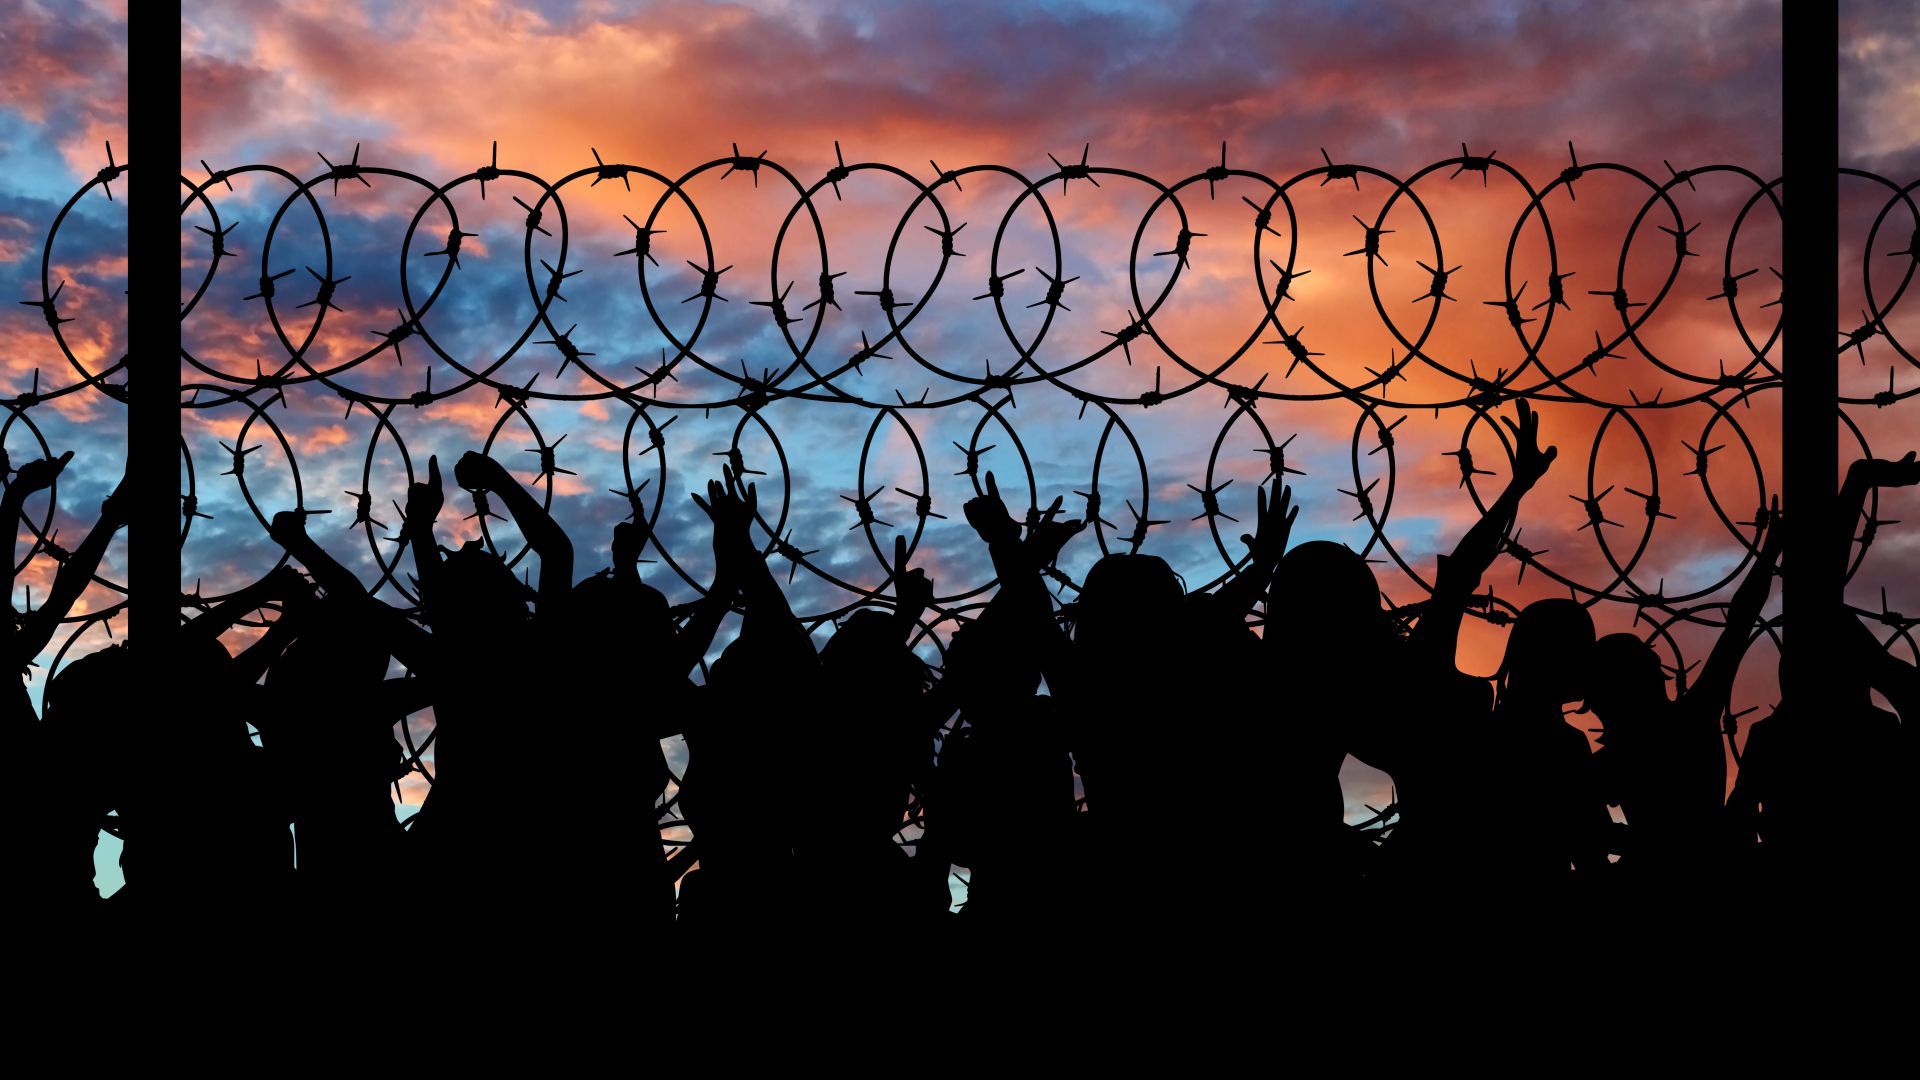 Crowded prisoners by fence